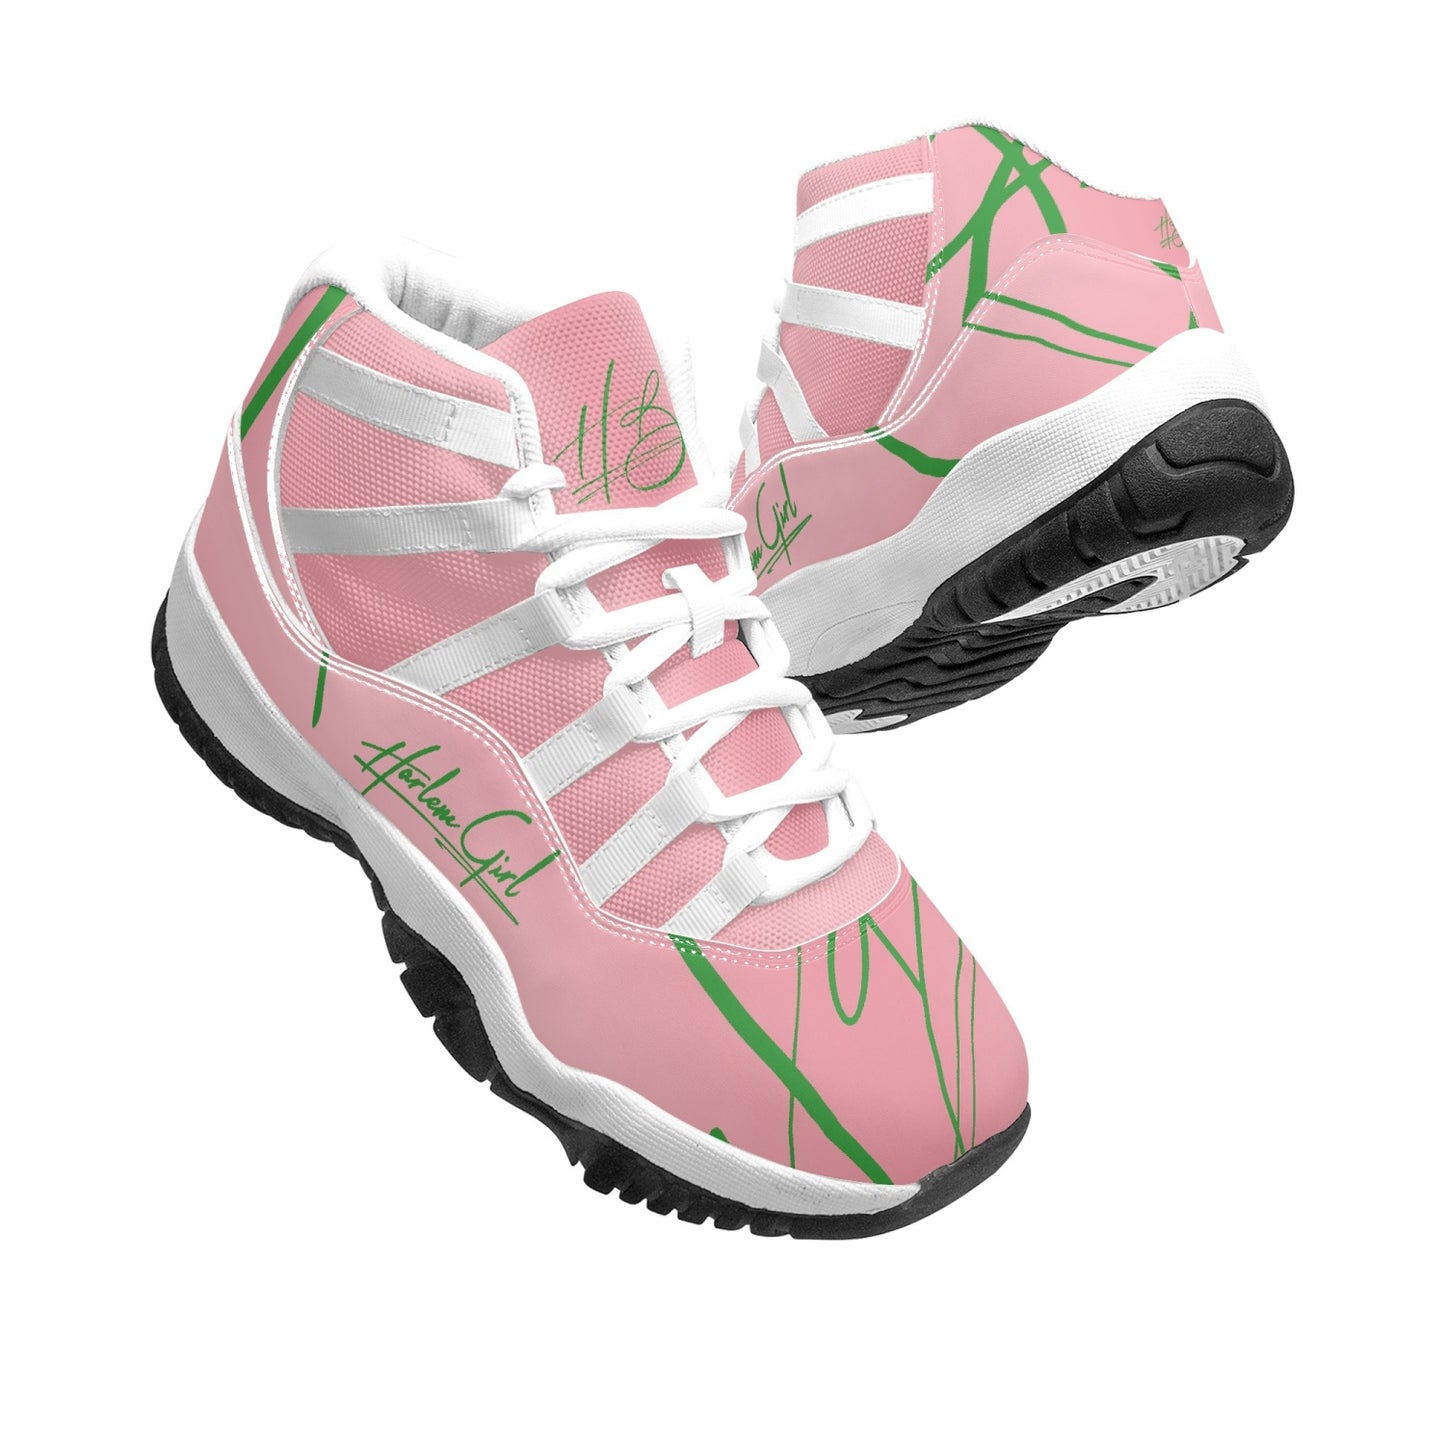 Harlem Girl "Tribe" Basketball - Pink and Green w/ White Trim (Women's)